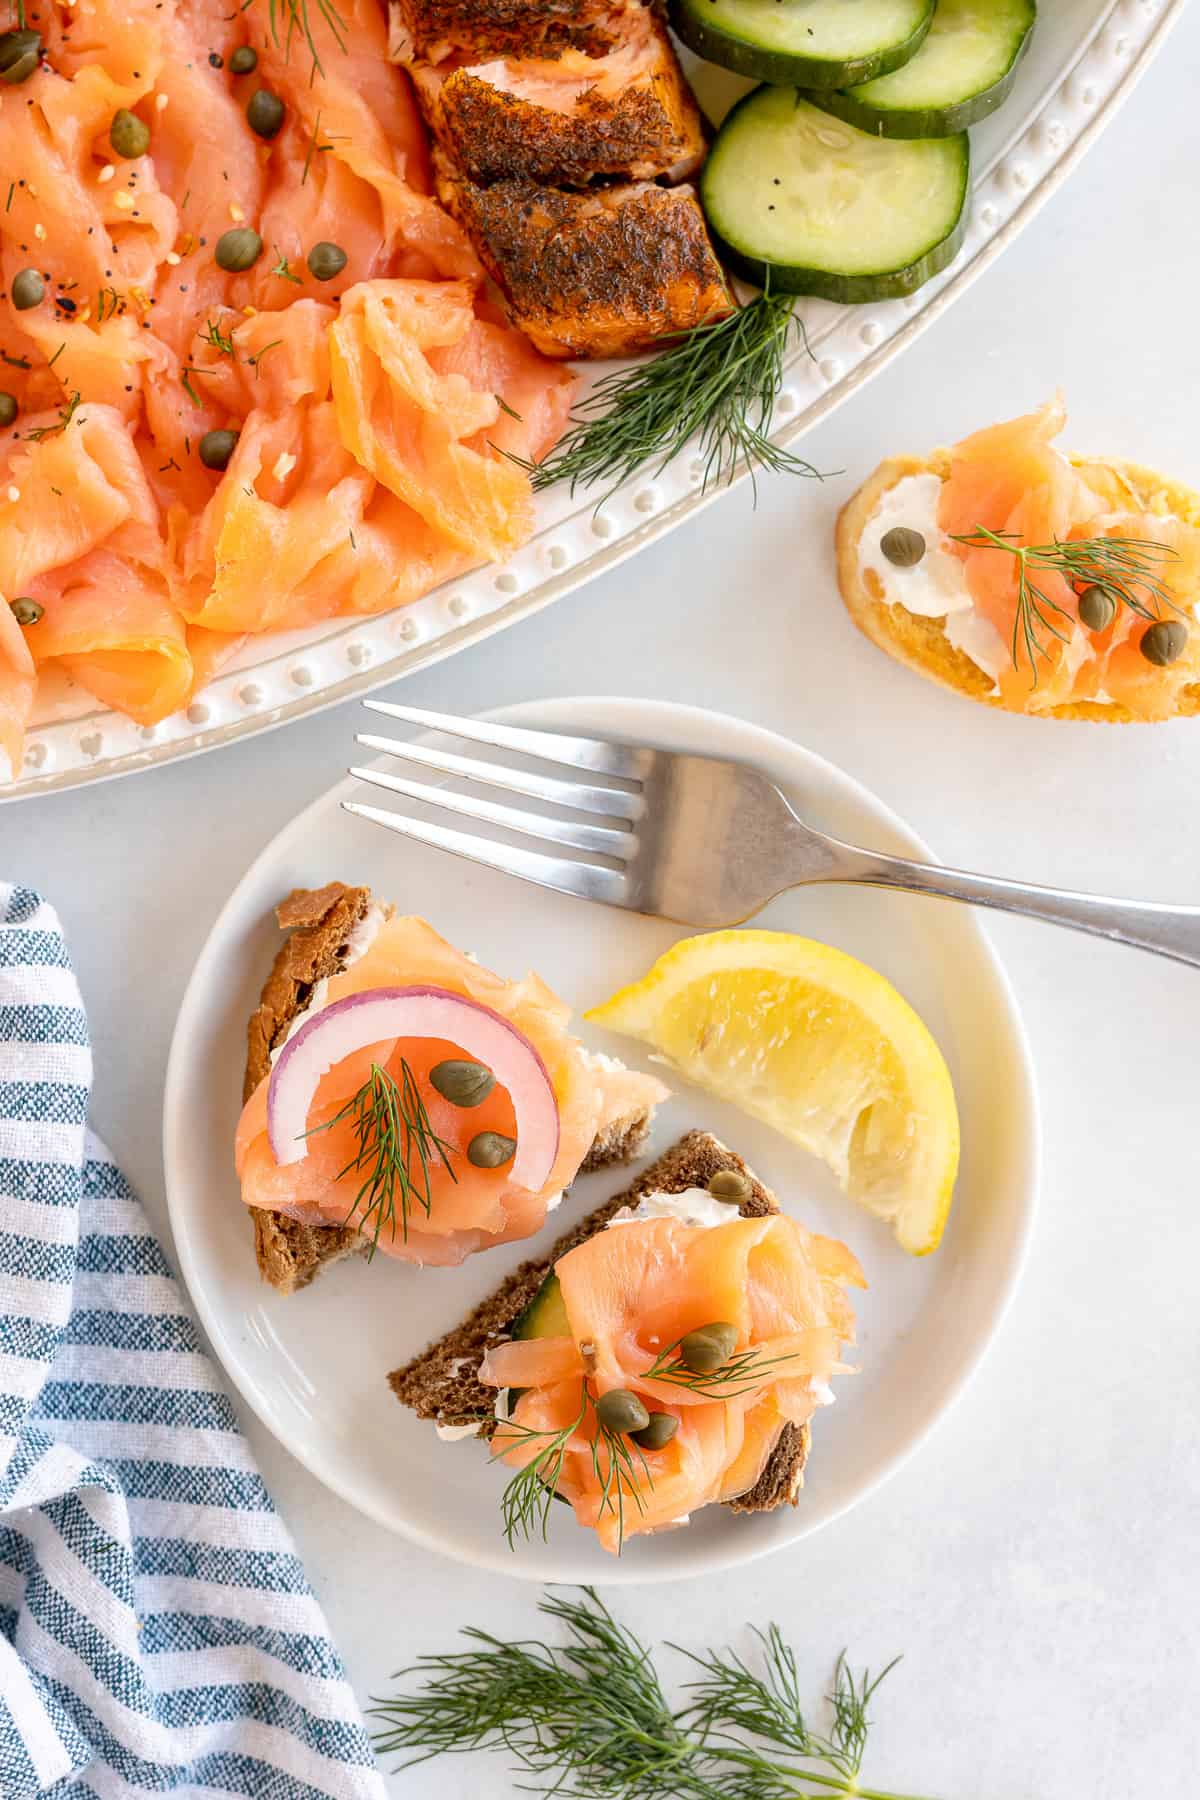 Small breads with cream cheese, smoked salmon, capers and dill on a plate with a lemon wedge.